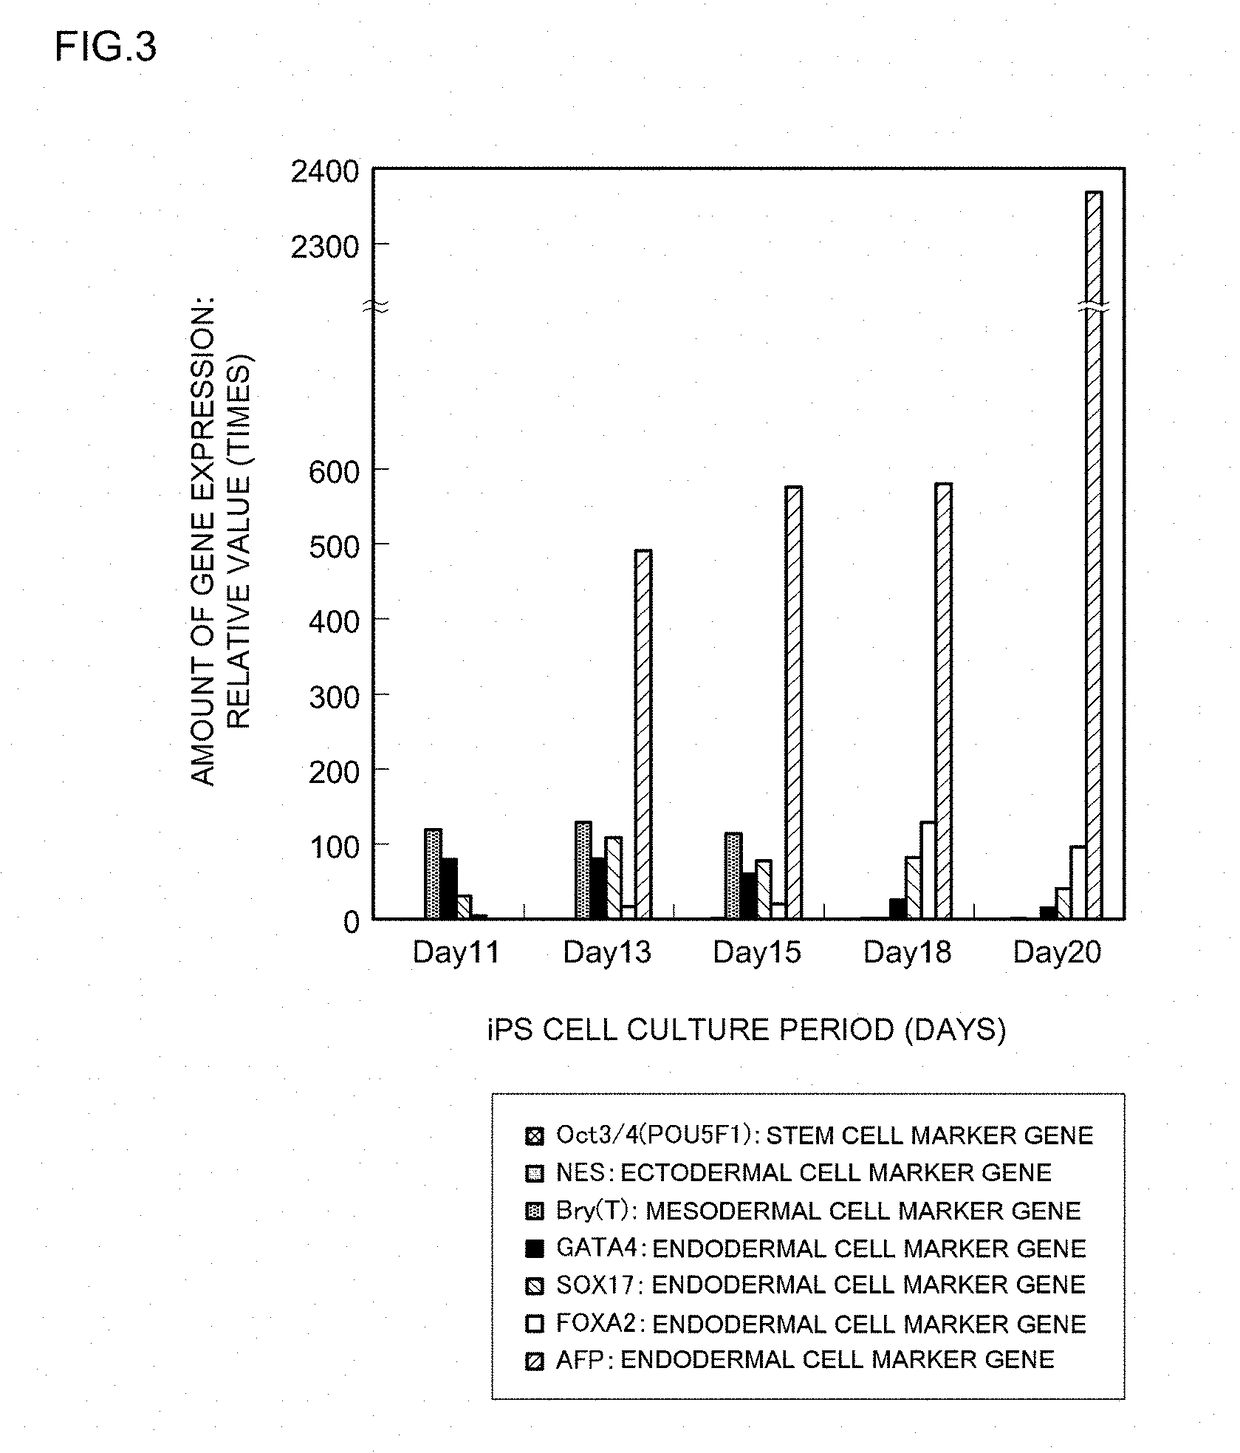 Method for inducing differentiation of pluripotent stem cells into endodermal cells